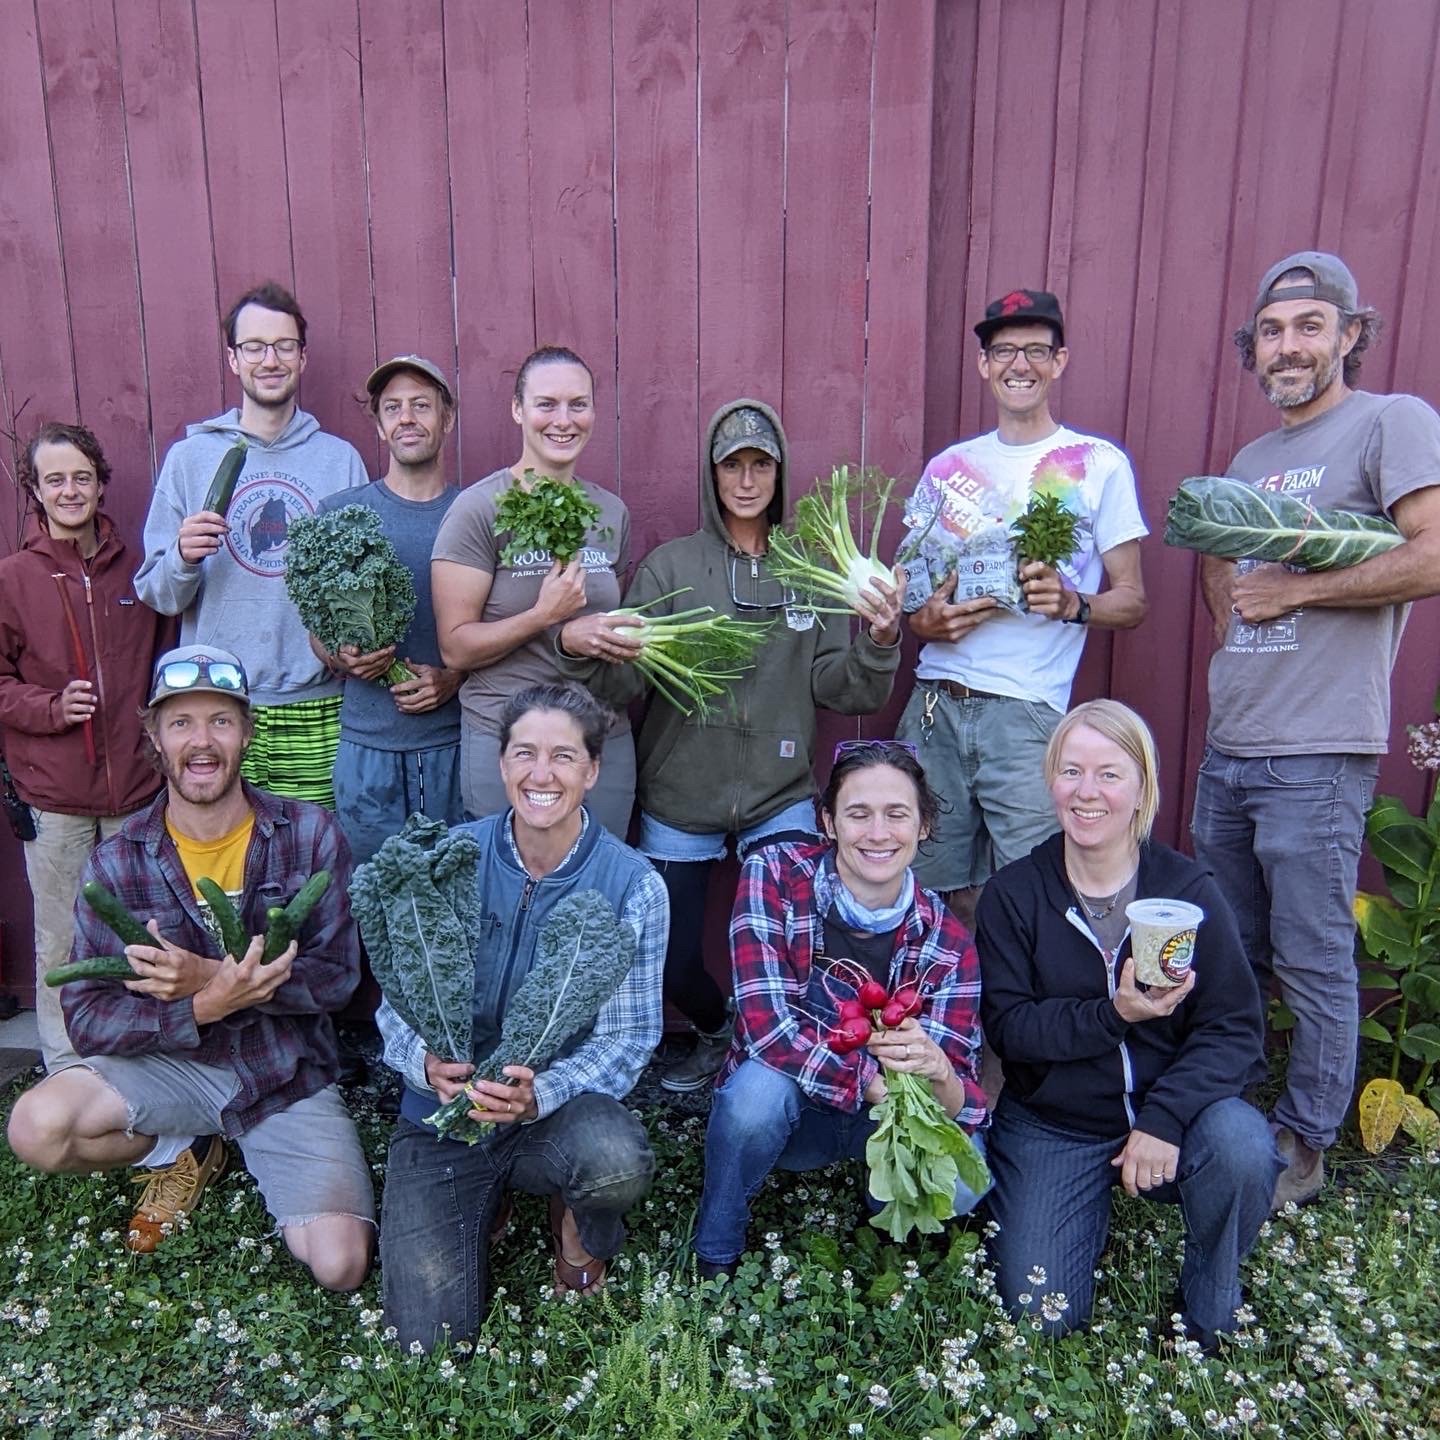 Root 5 staff poses with produce outside a barn.